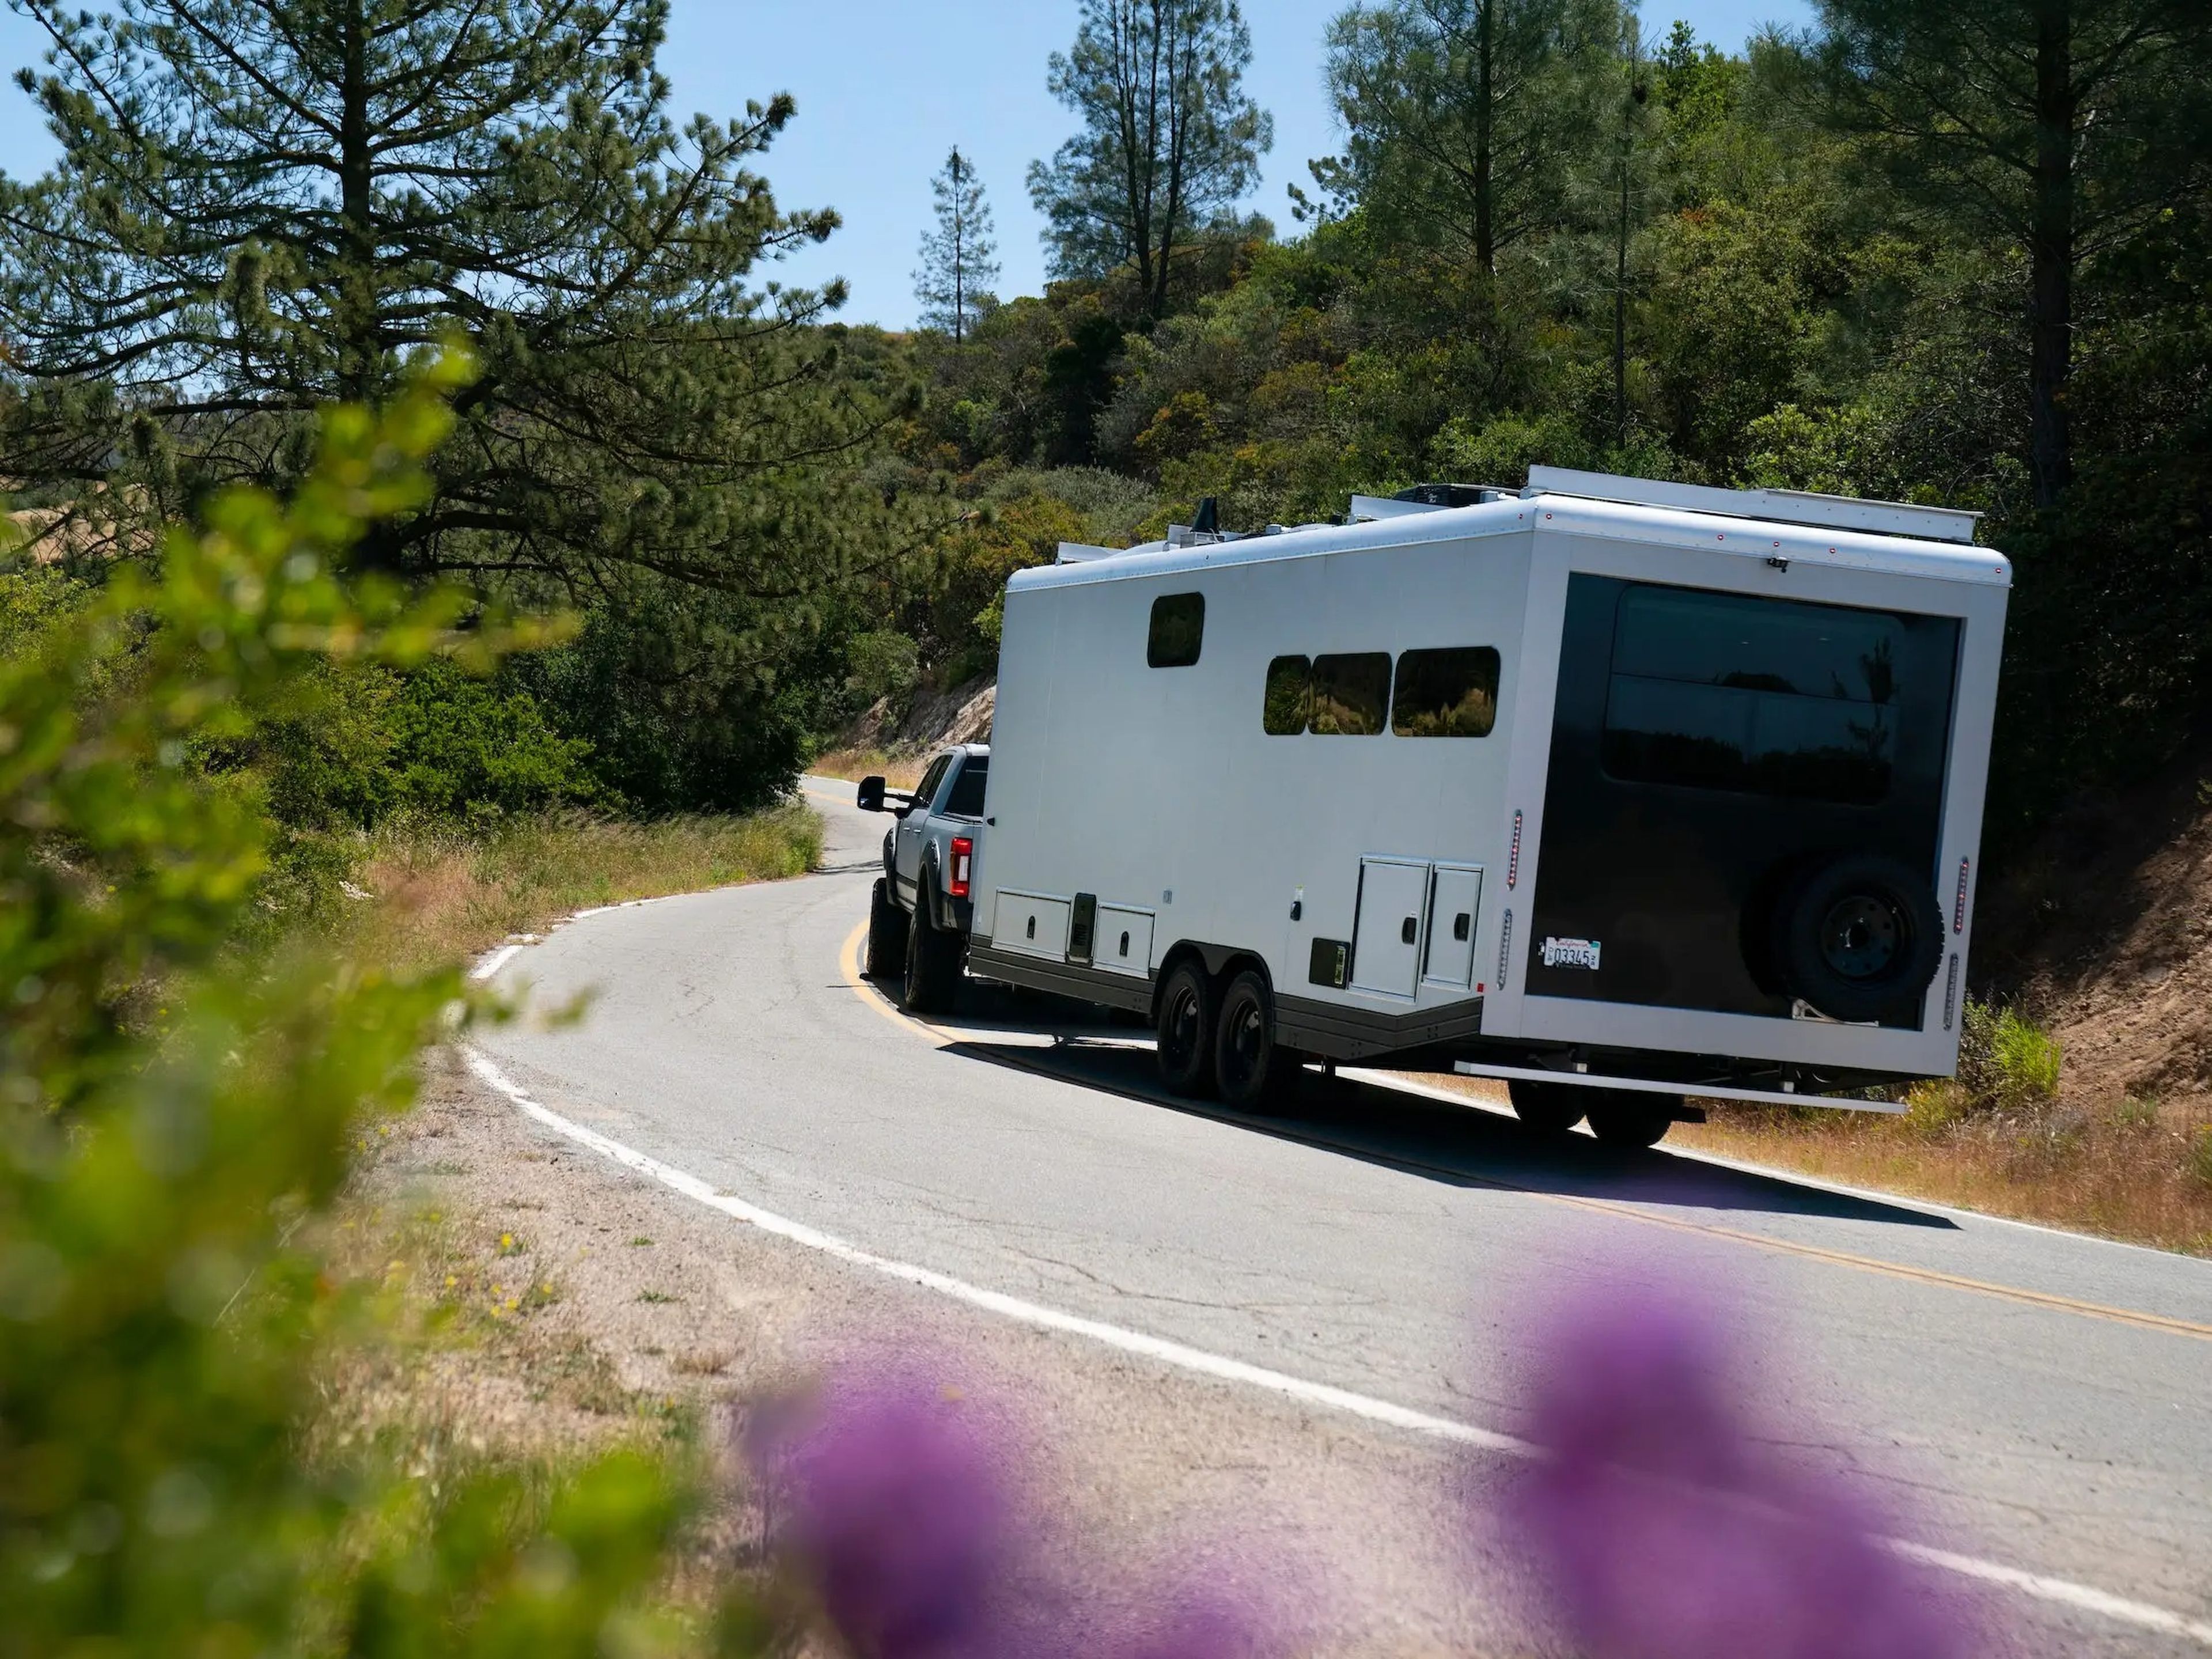 The travel trailer on the road.